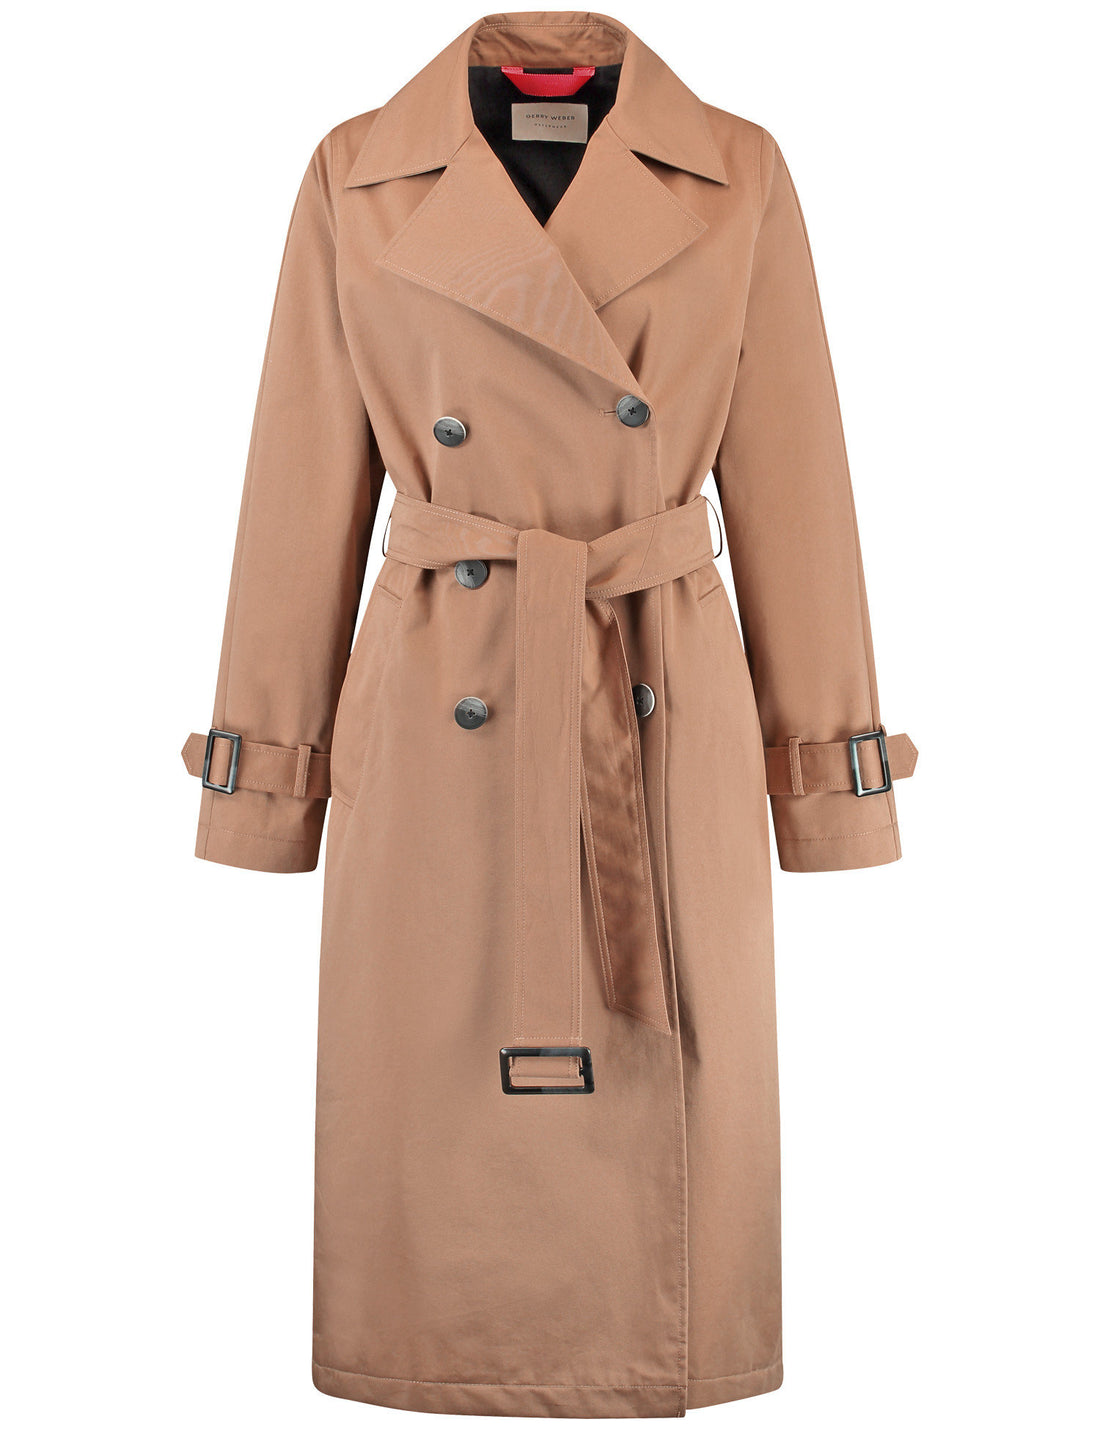 Classic Trench Coat With A Tie-Around Belt_350002-31178_70243_02